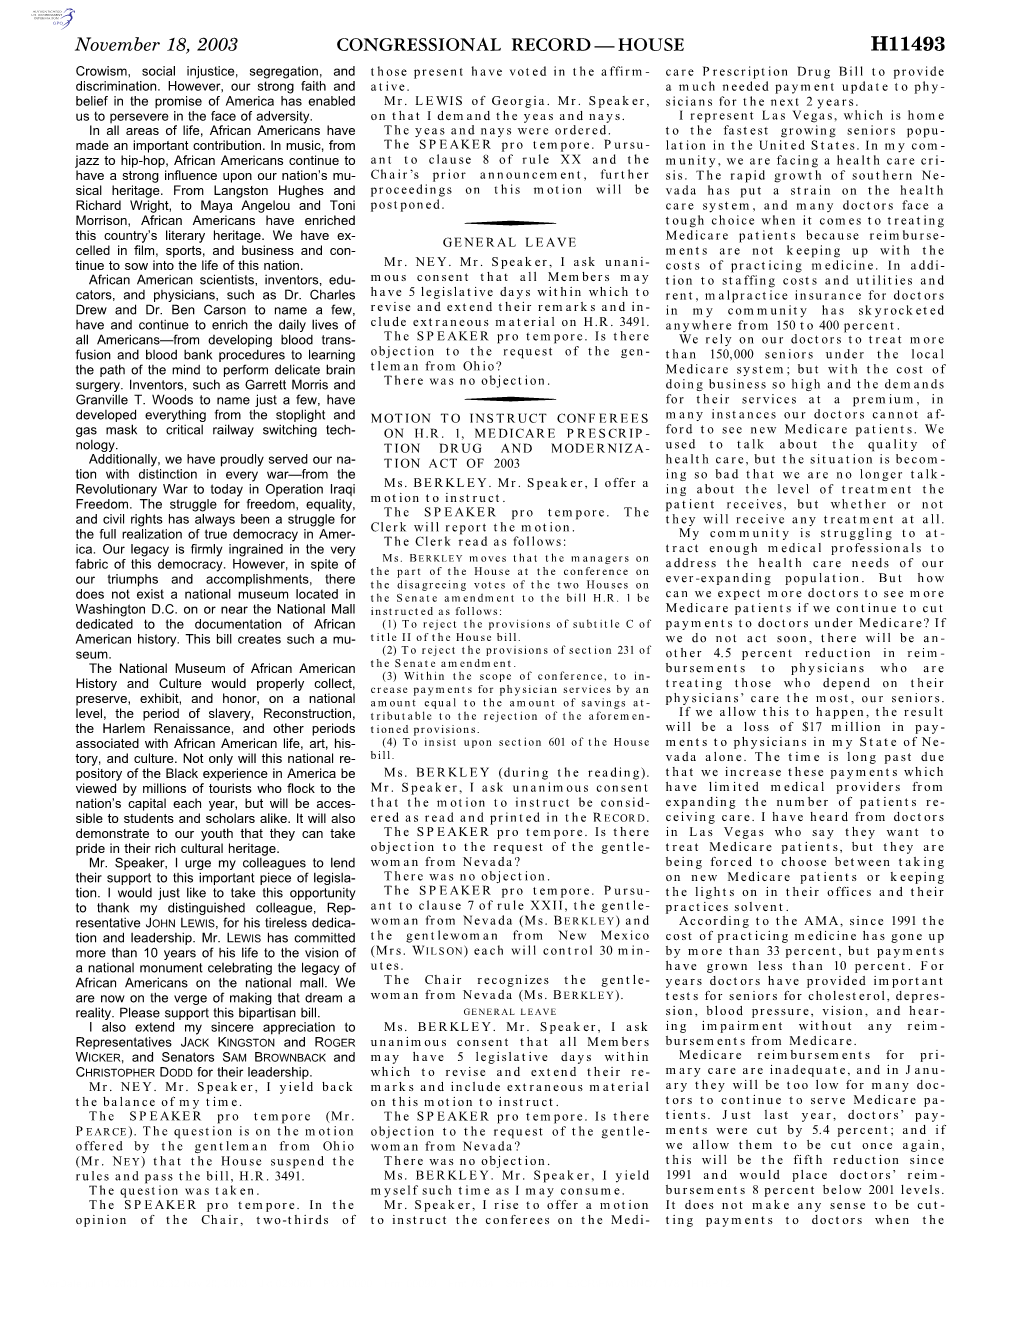 Congressional Record—House H11493